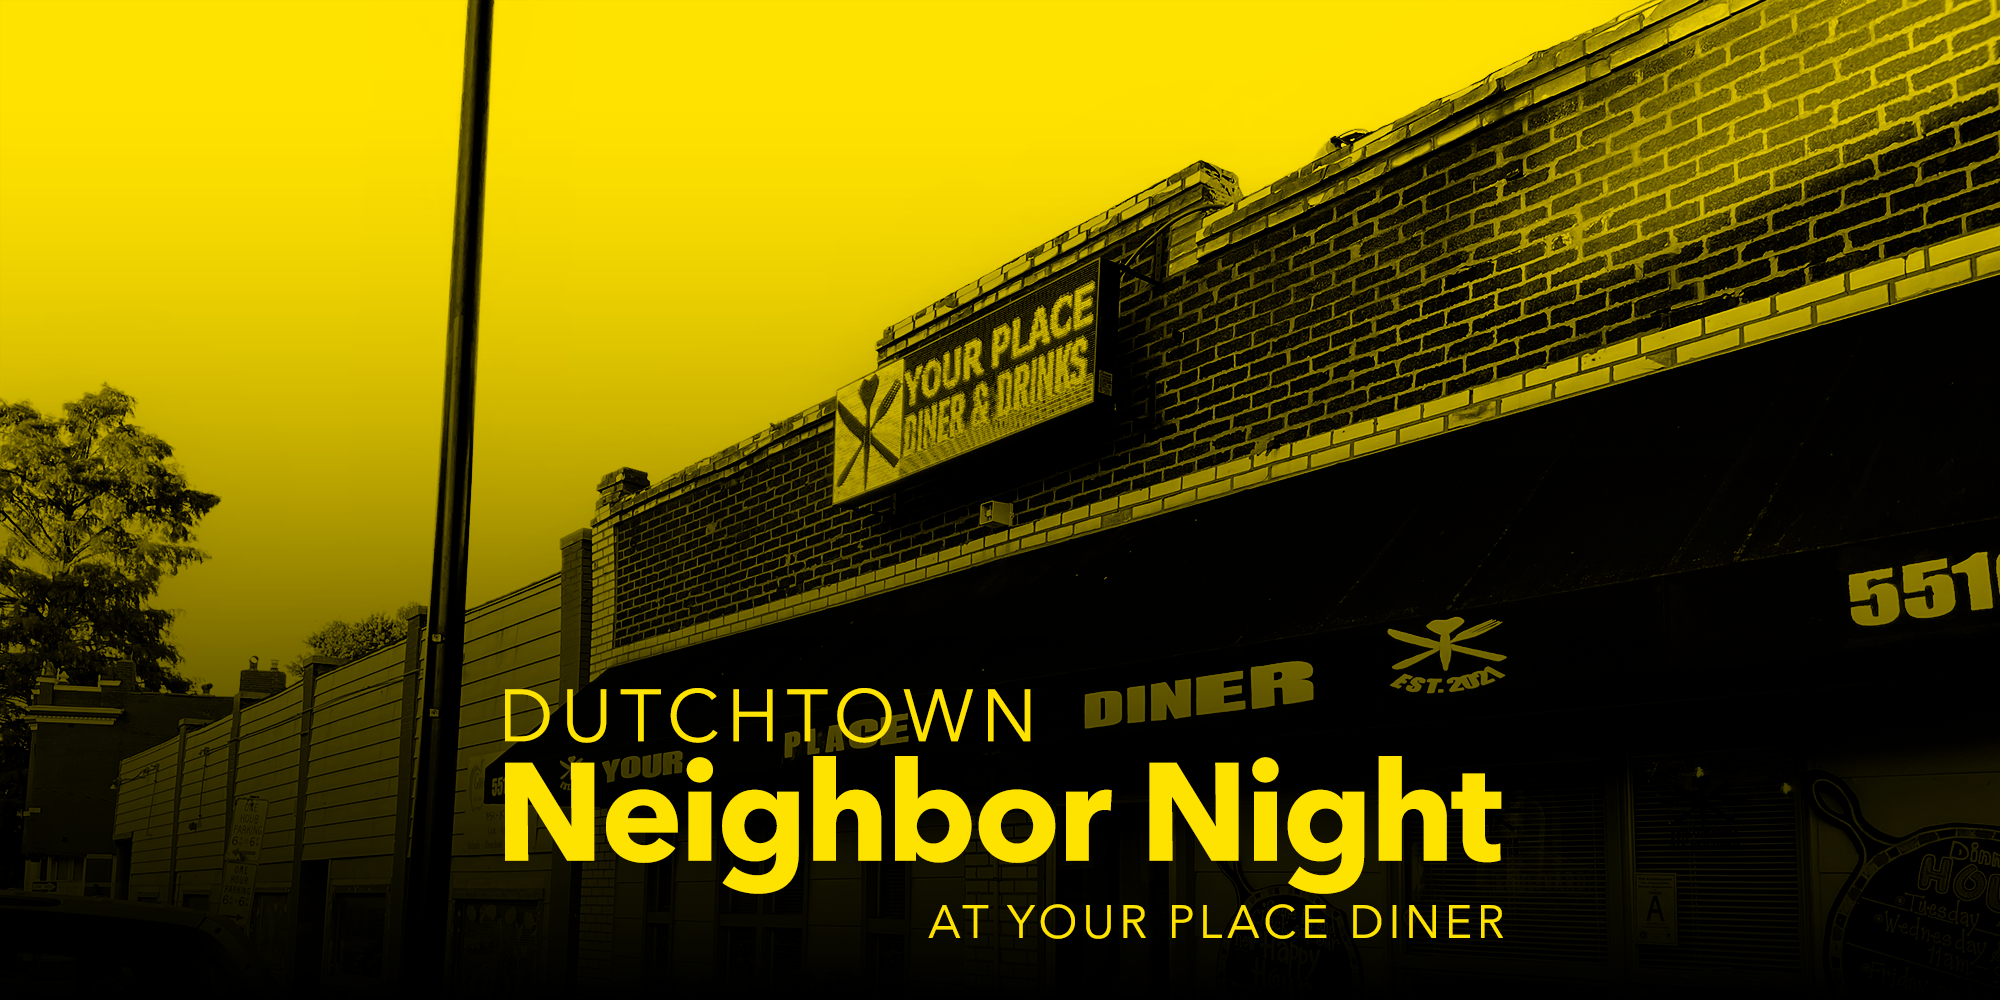 Dutchtown Neighbor Night at Your Place Diner in Dutchtown, St. Louis, MO.